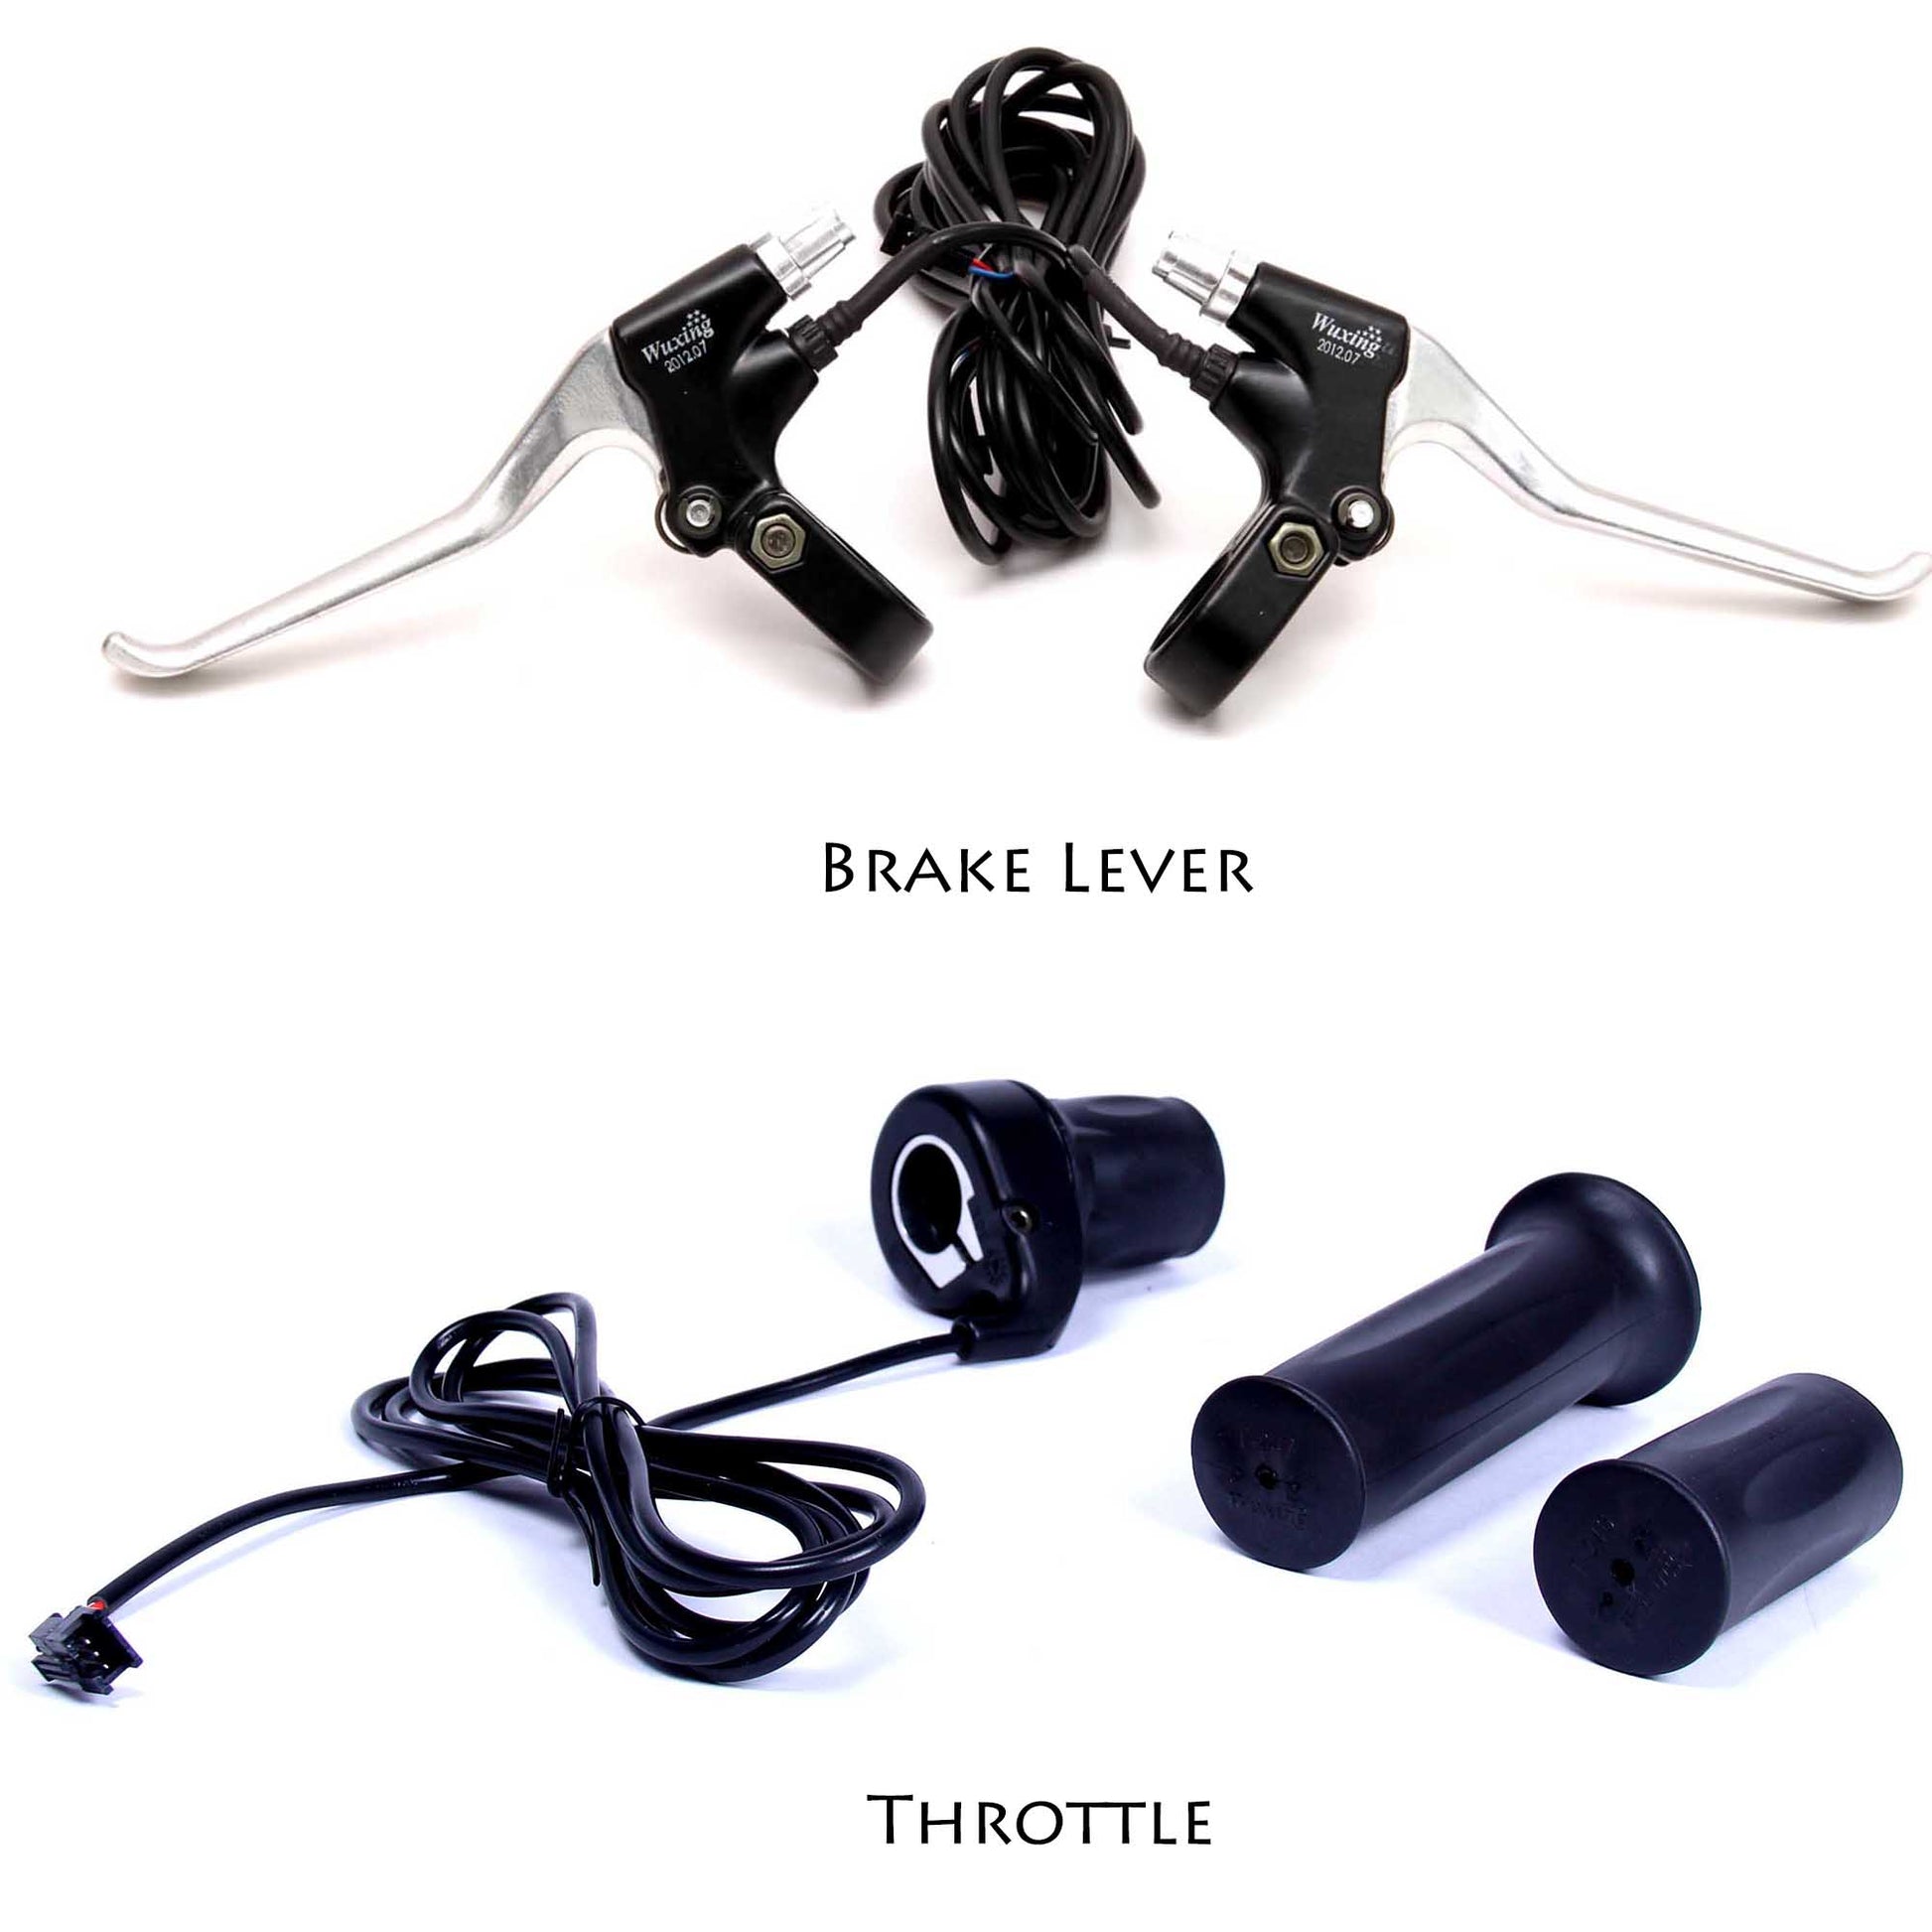 brake lever, throttle for electric bicycle kit